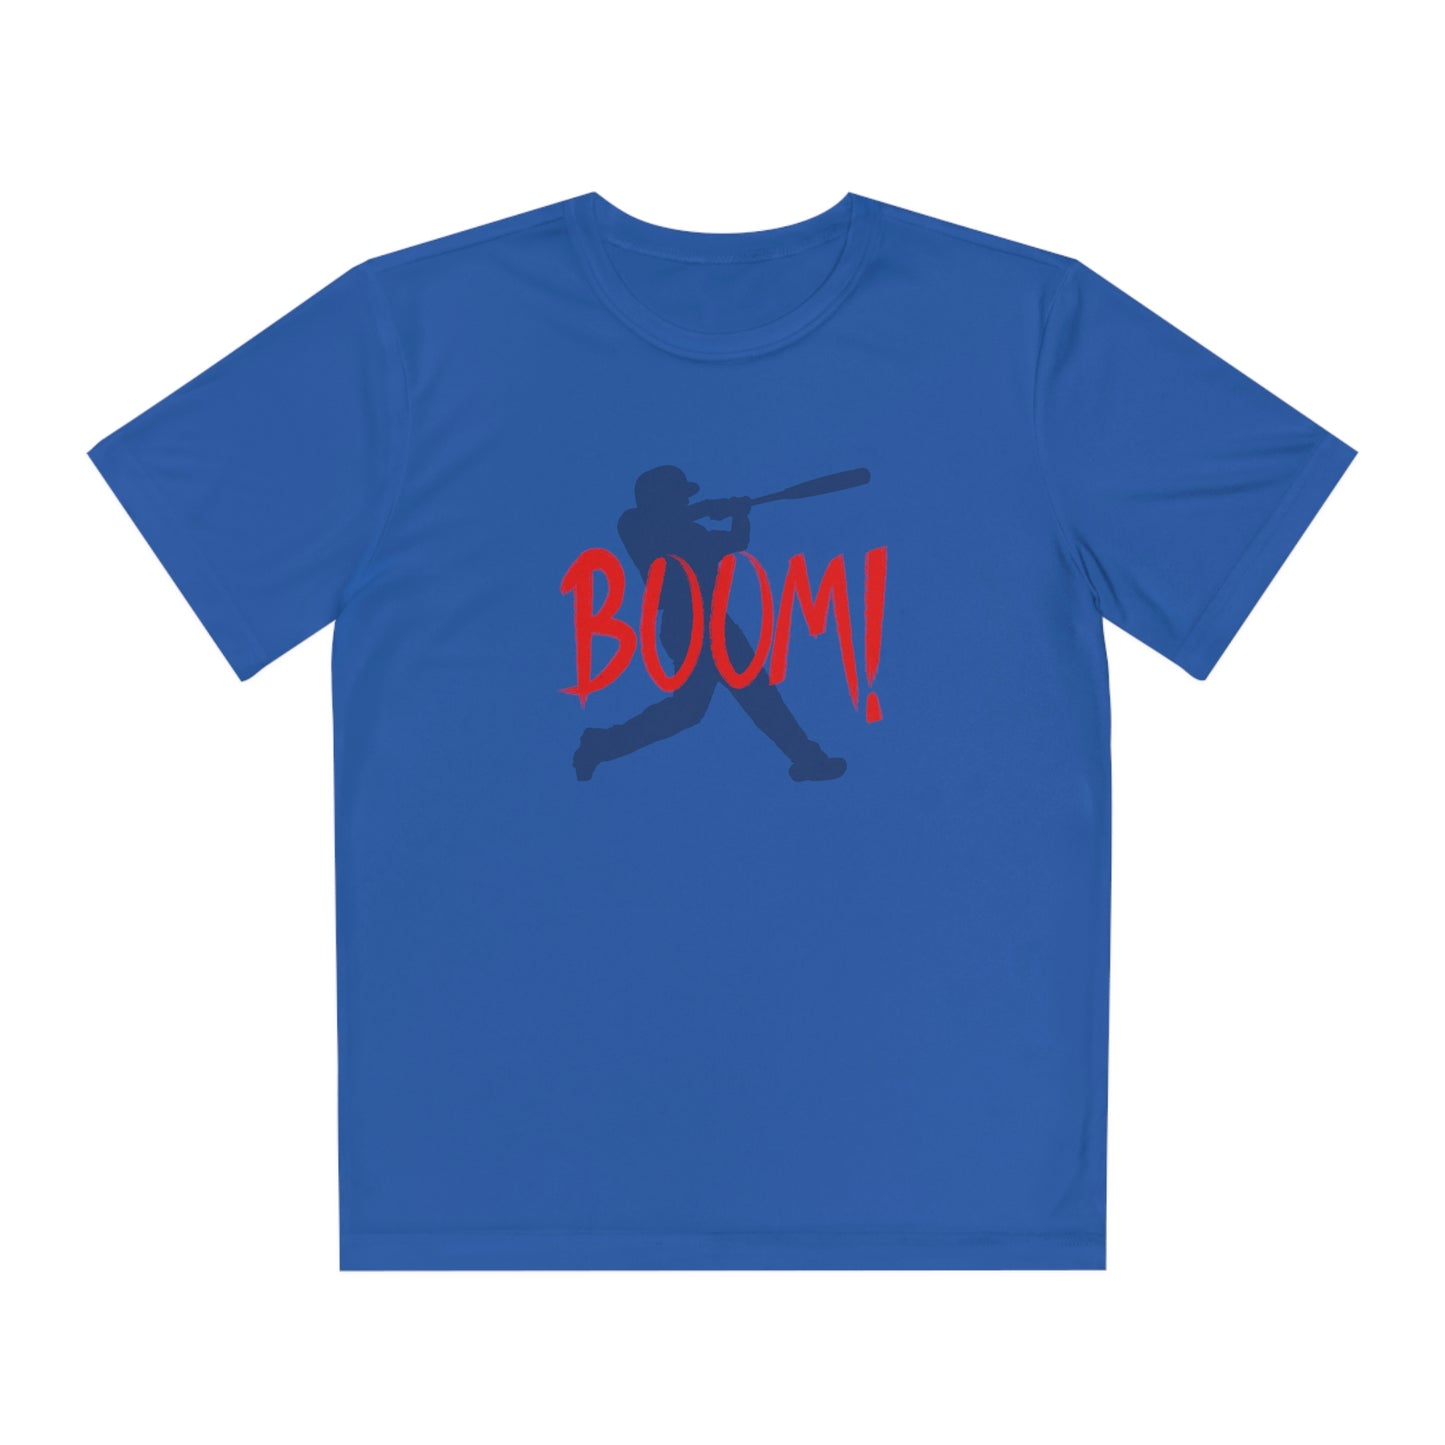 The “BOOM” Youth Competitor Moisture Wicking Tee